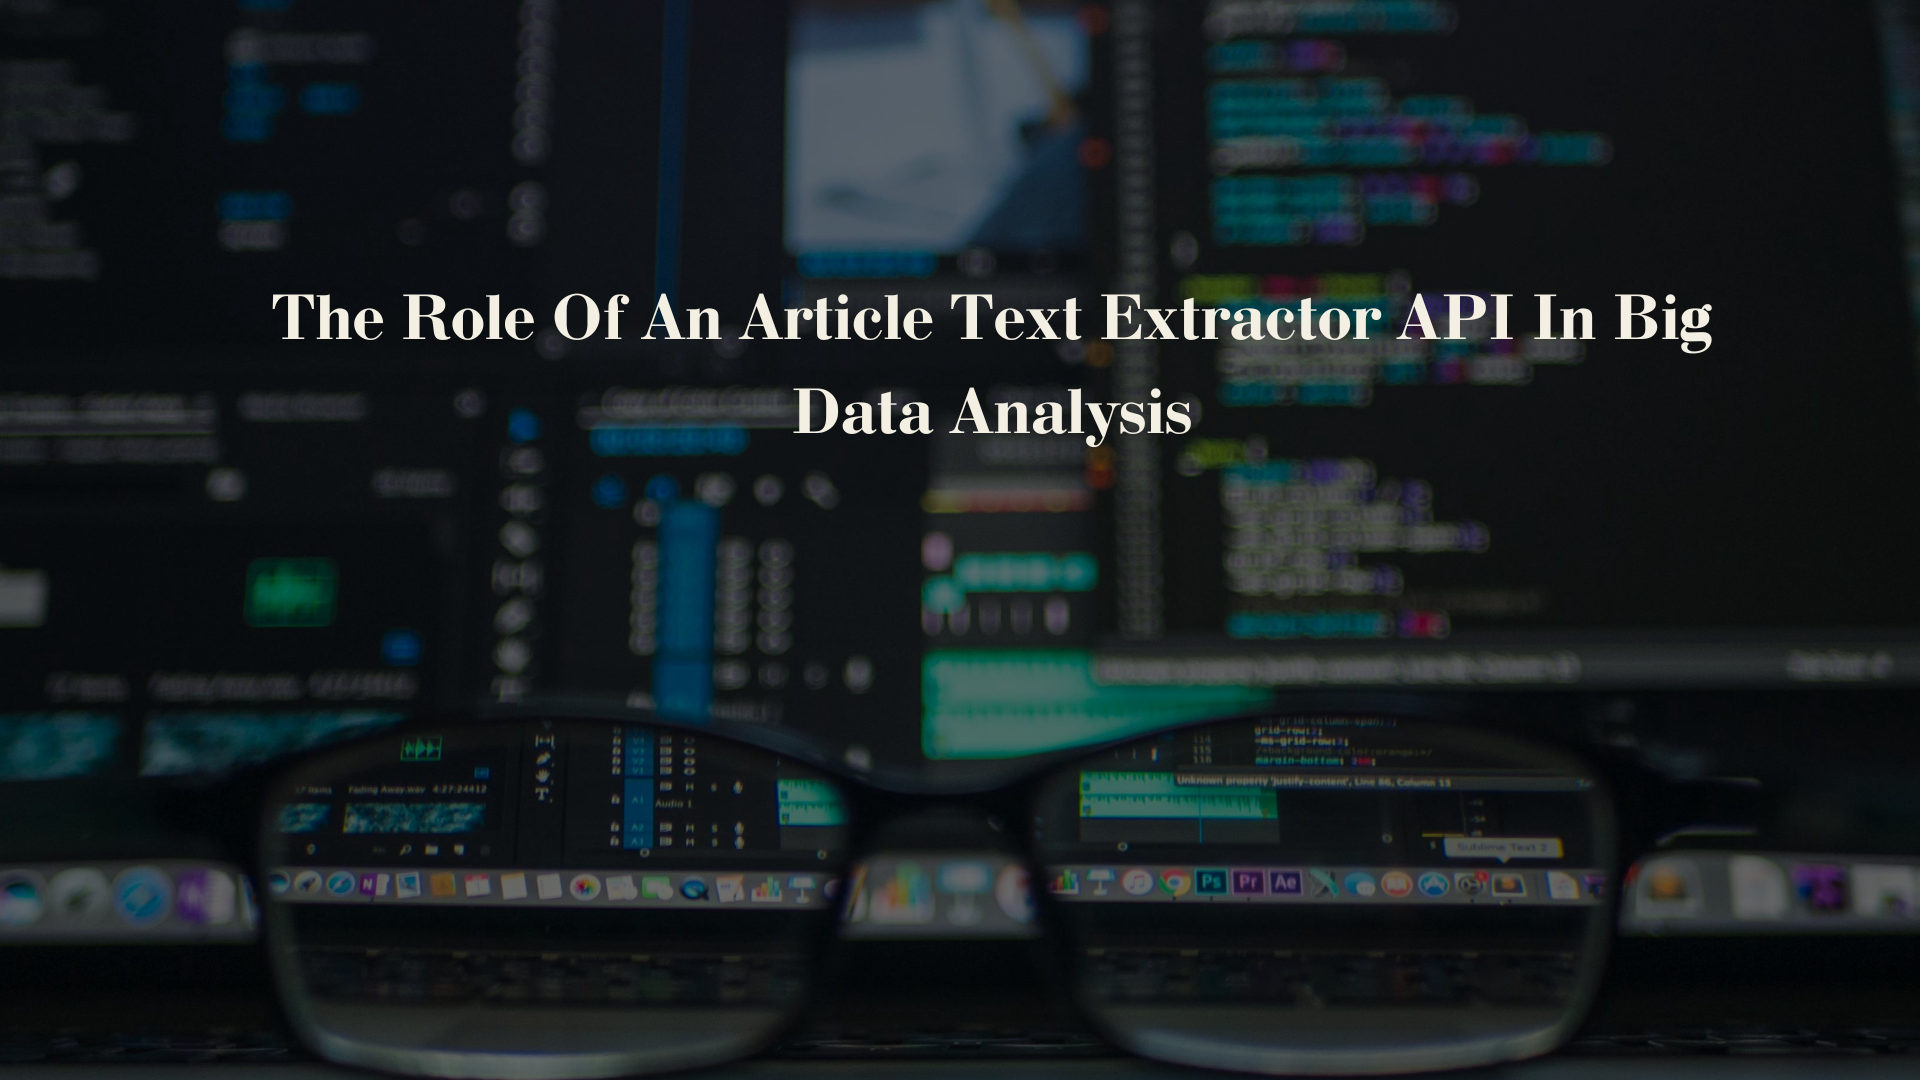 The Role Of An Article Text Extractor API In Big Data Analysis